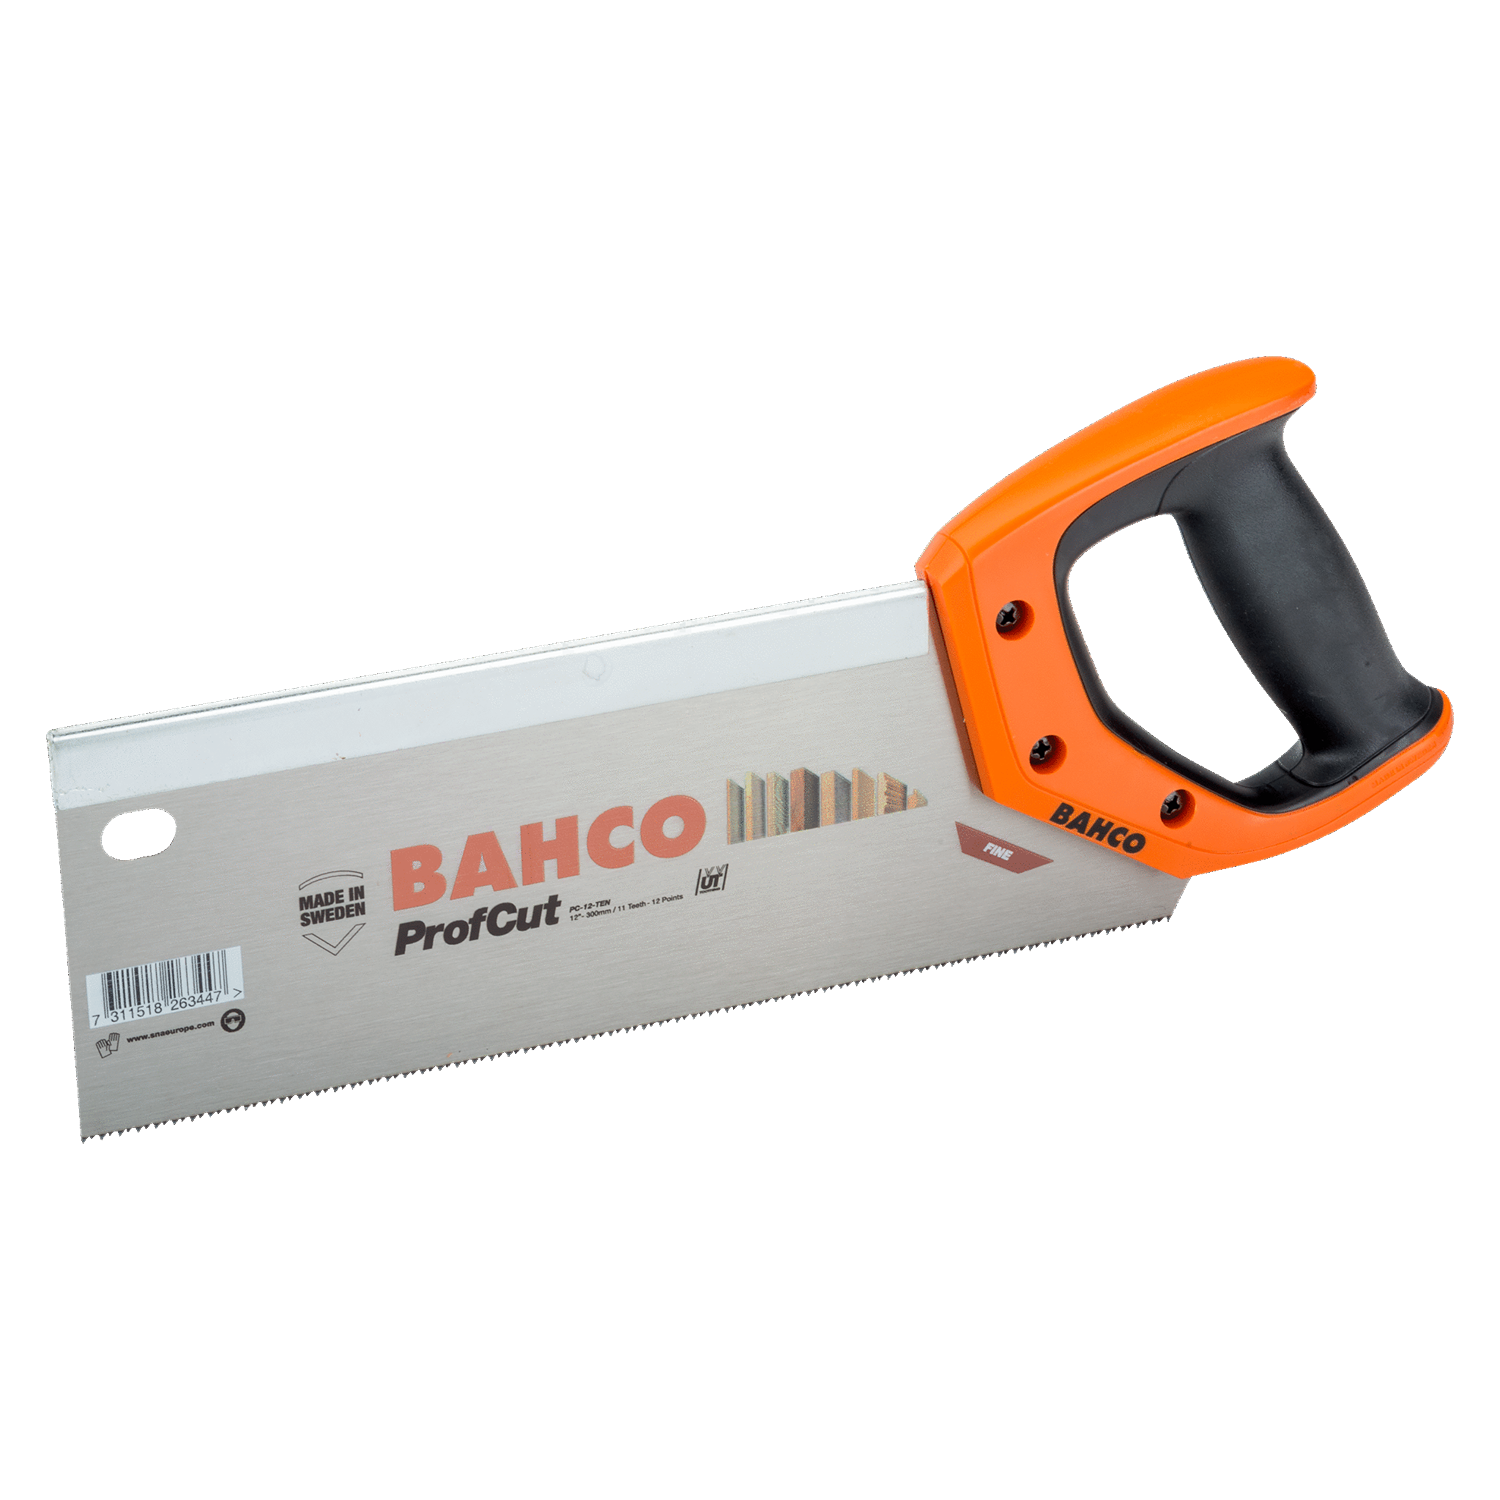 BAHCO PC-TEN ProfCut Tenon Handsaw Medium Thick Materials 11"/12" - Premium Handsaw from BAHCO - Shop now at Yew Aik.